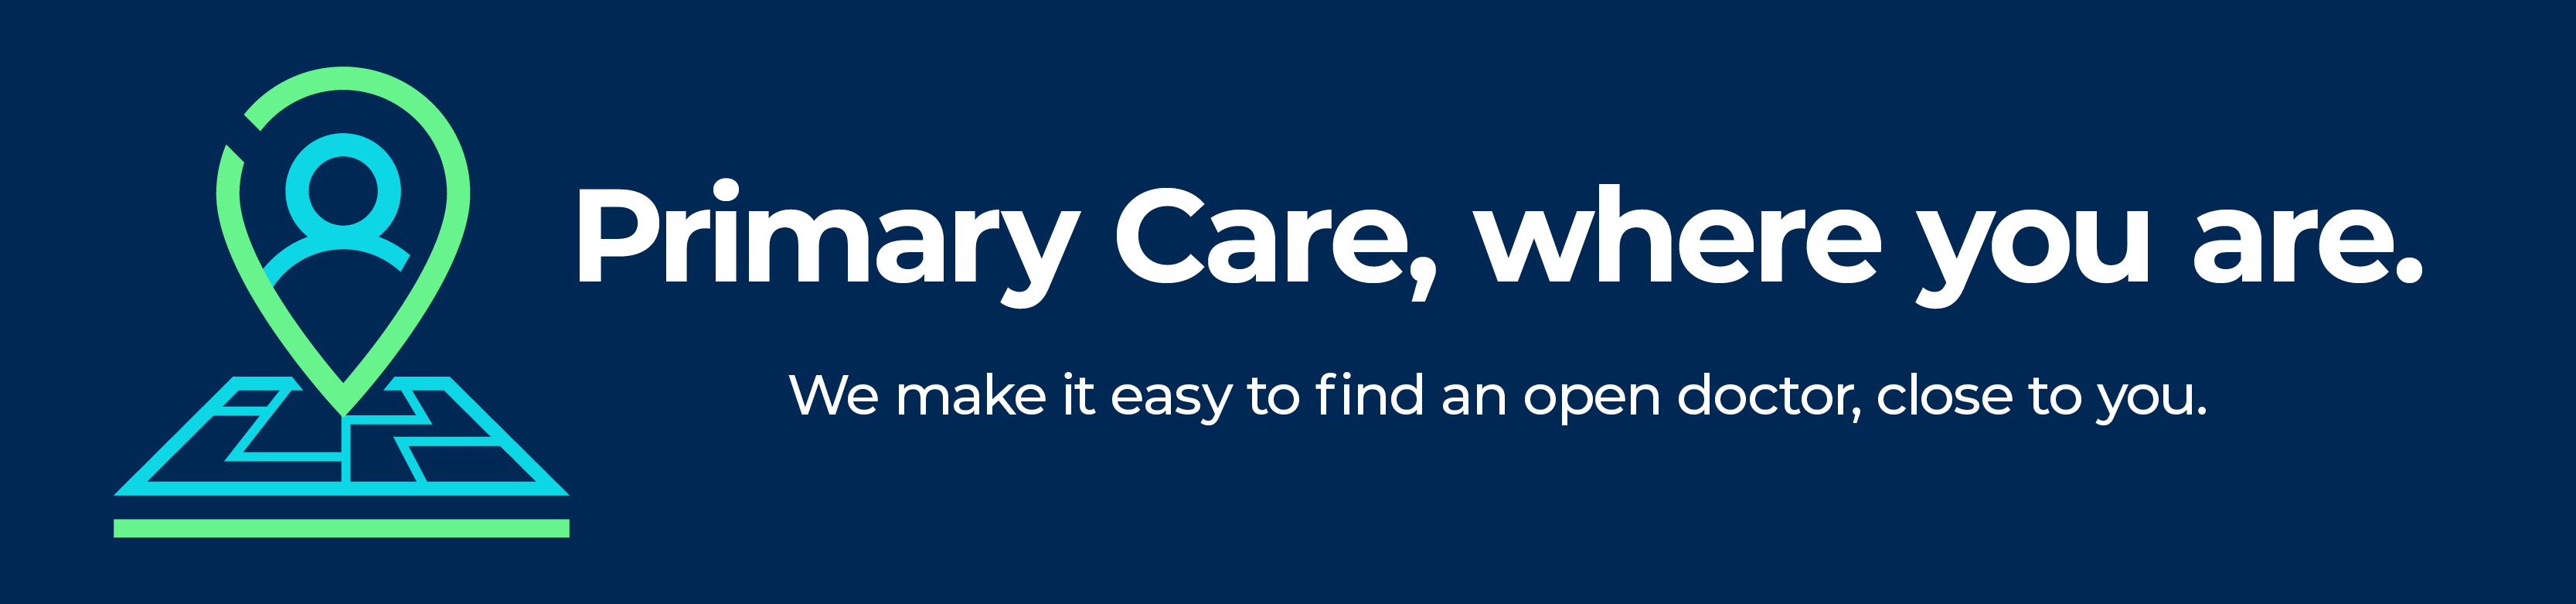 Corewell Health makes it easy to find an open doctor, close to you